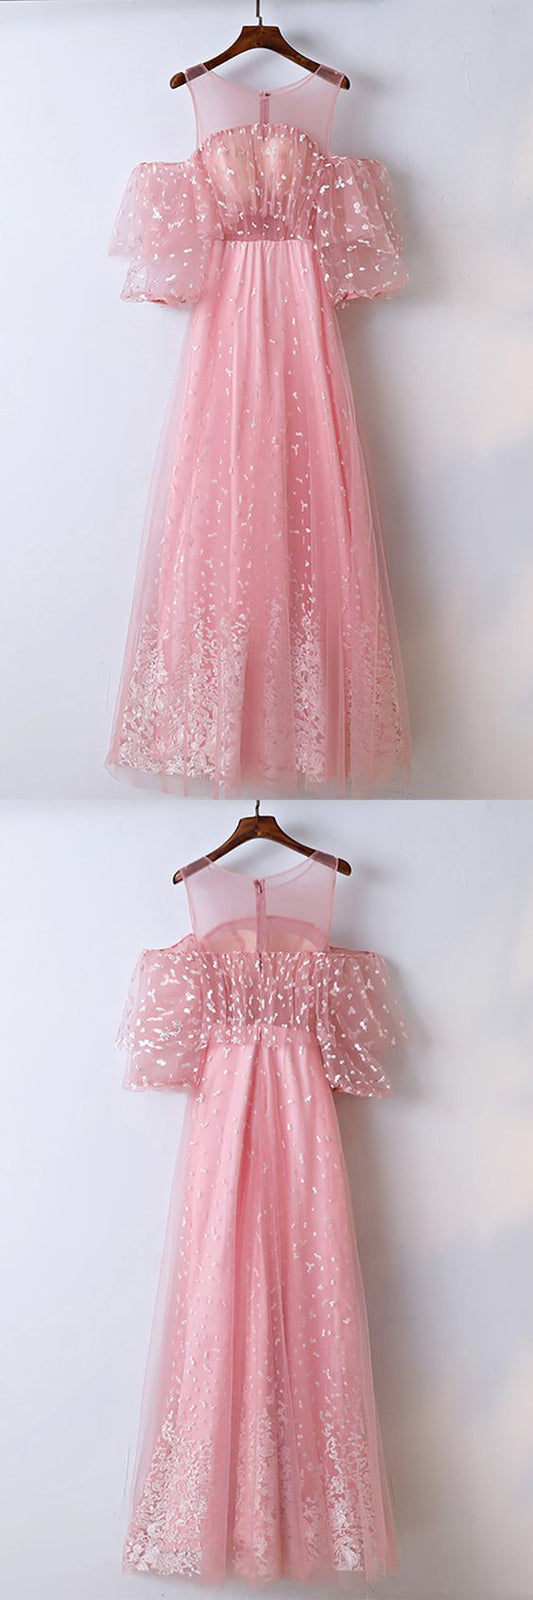 Prom Dresses Lovely Pink Applique Lace Long Prom Dress  cg8851